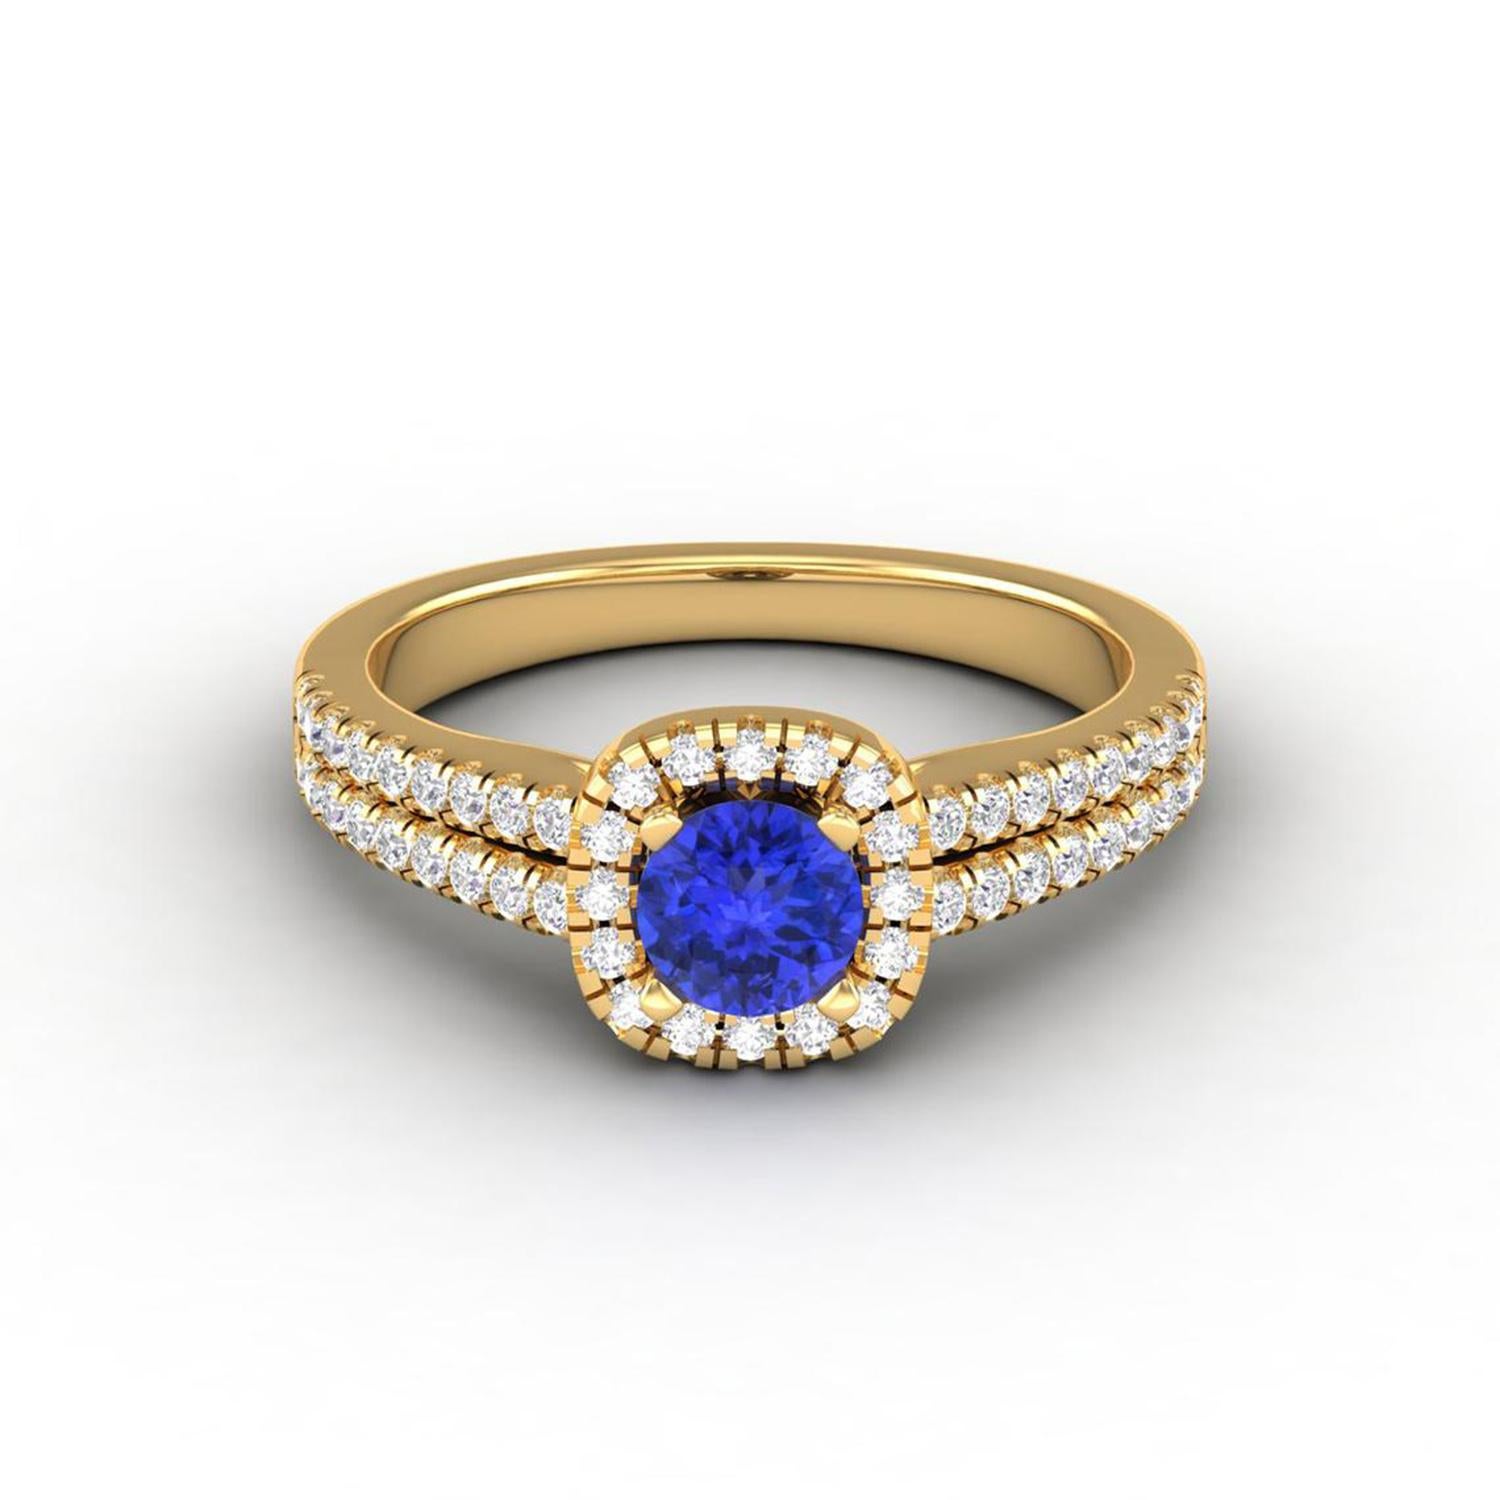 Modern 14 K Gold Tanzanite Ring / Diamond Solitaire Ring / Ring for Her For Sale